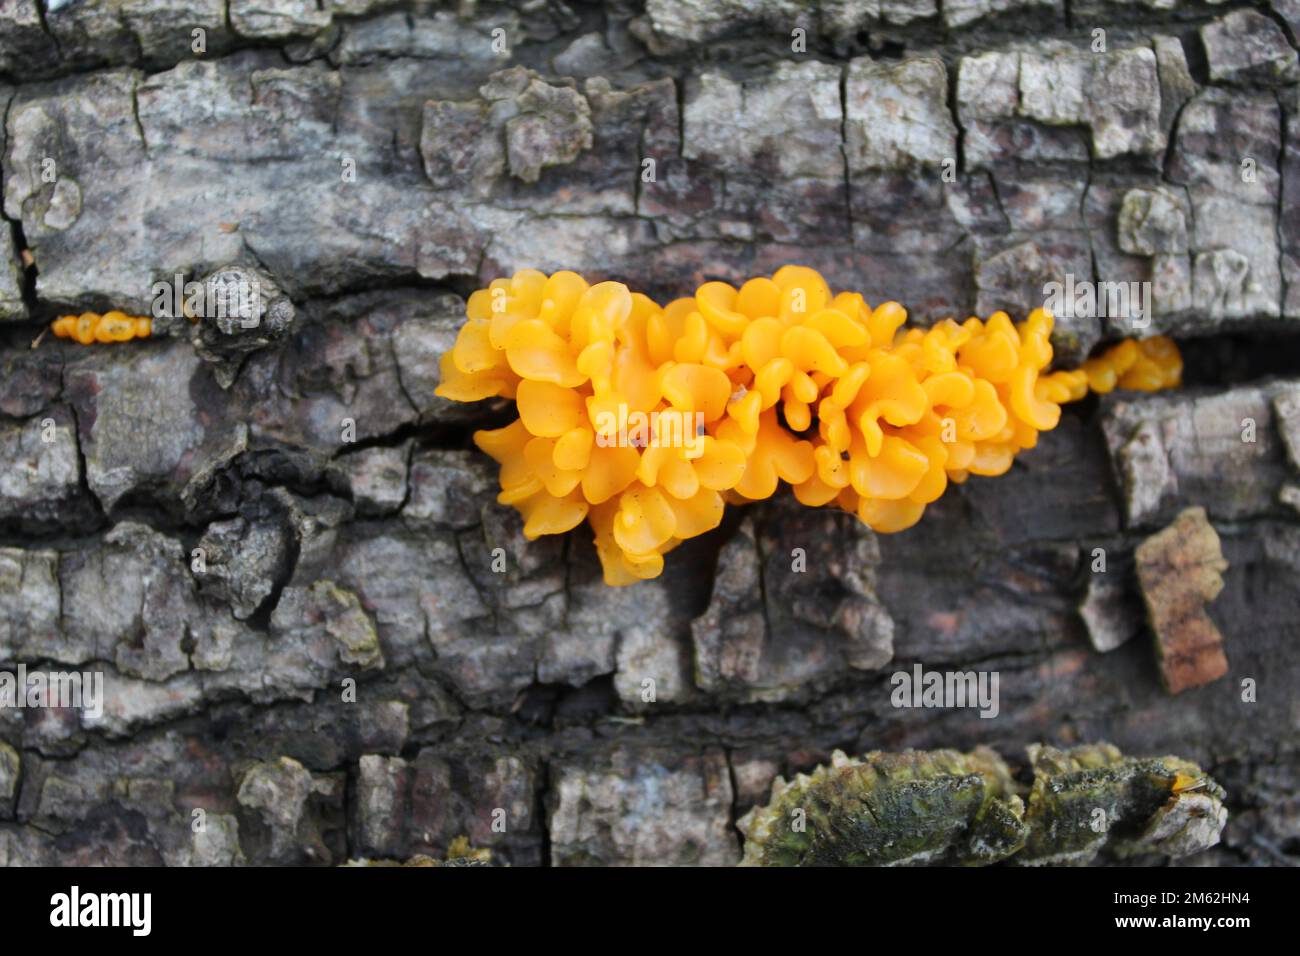 Orange jelly fungus on a log at Blue Star Memorial Woods in Glenview, Illinois Stock Photo